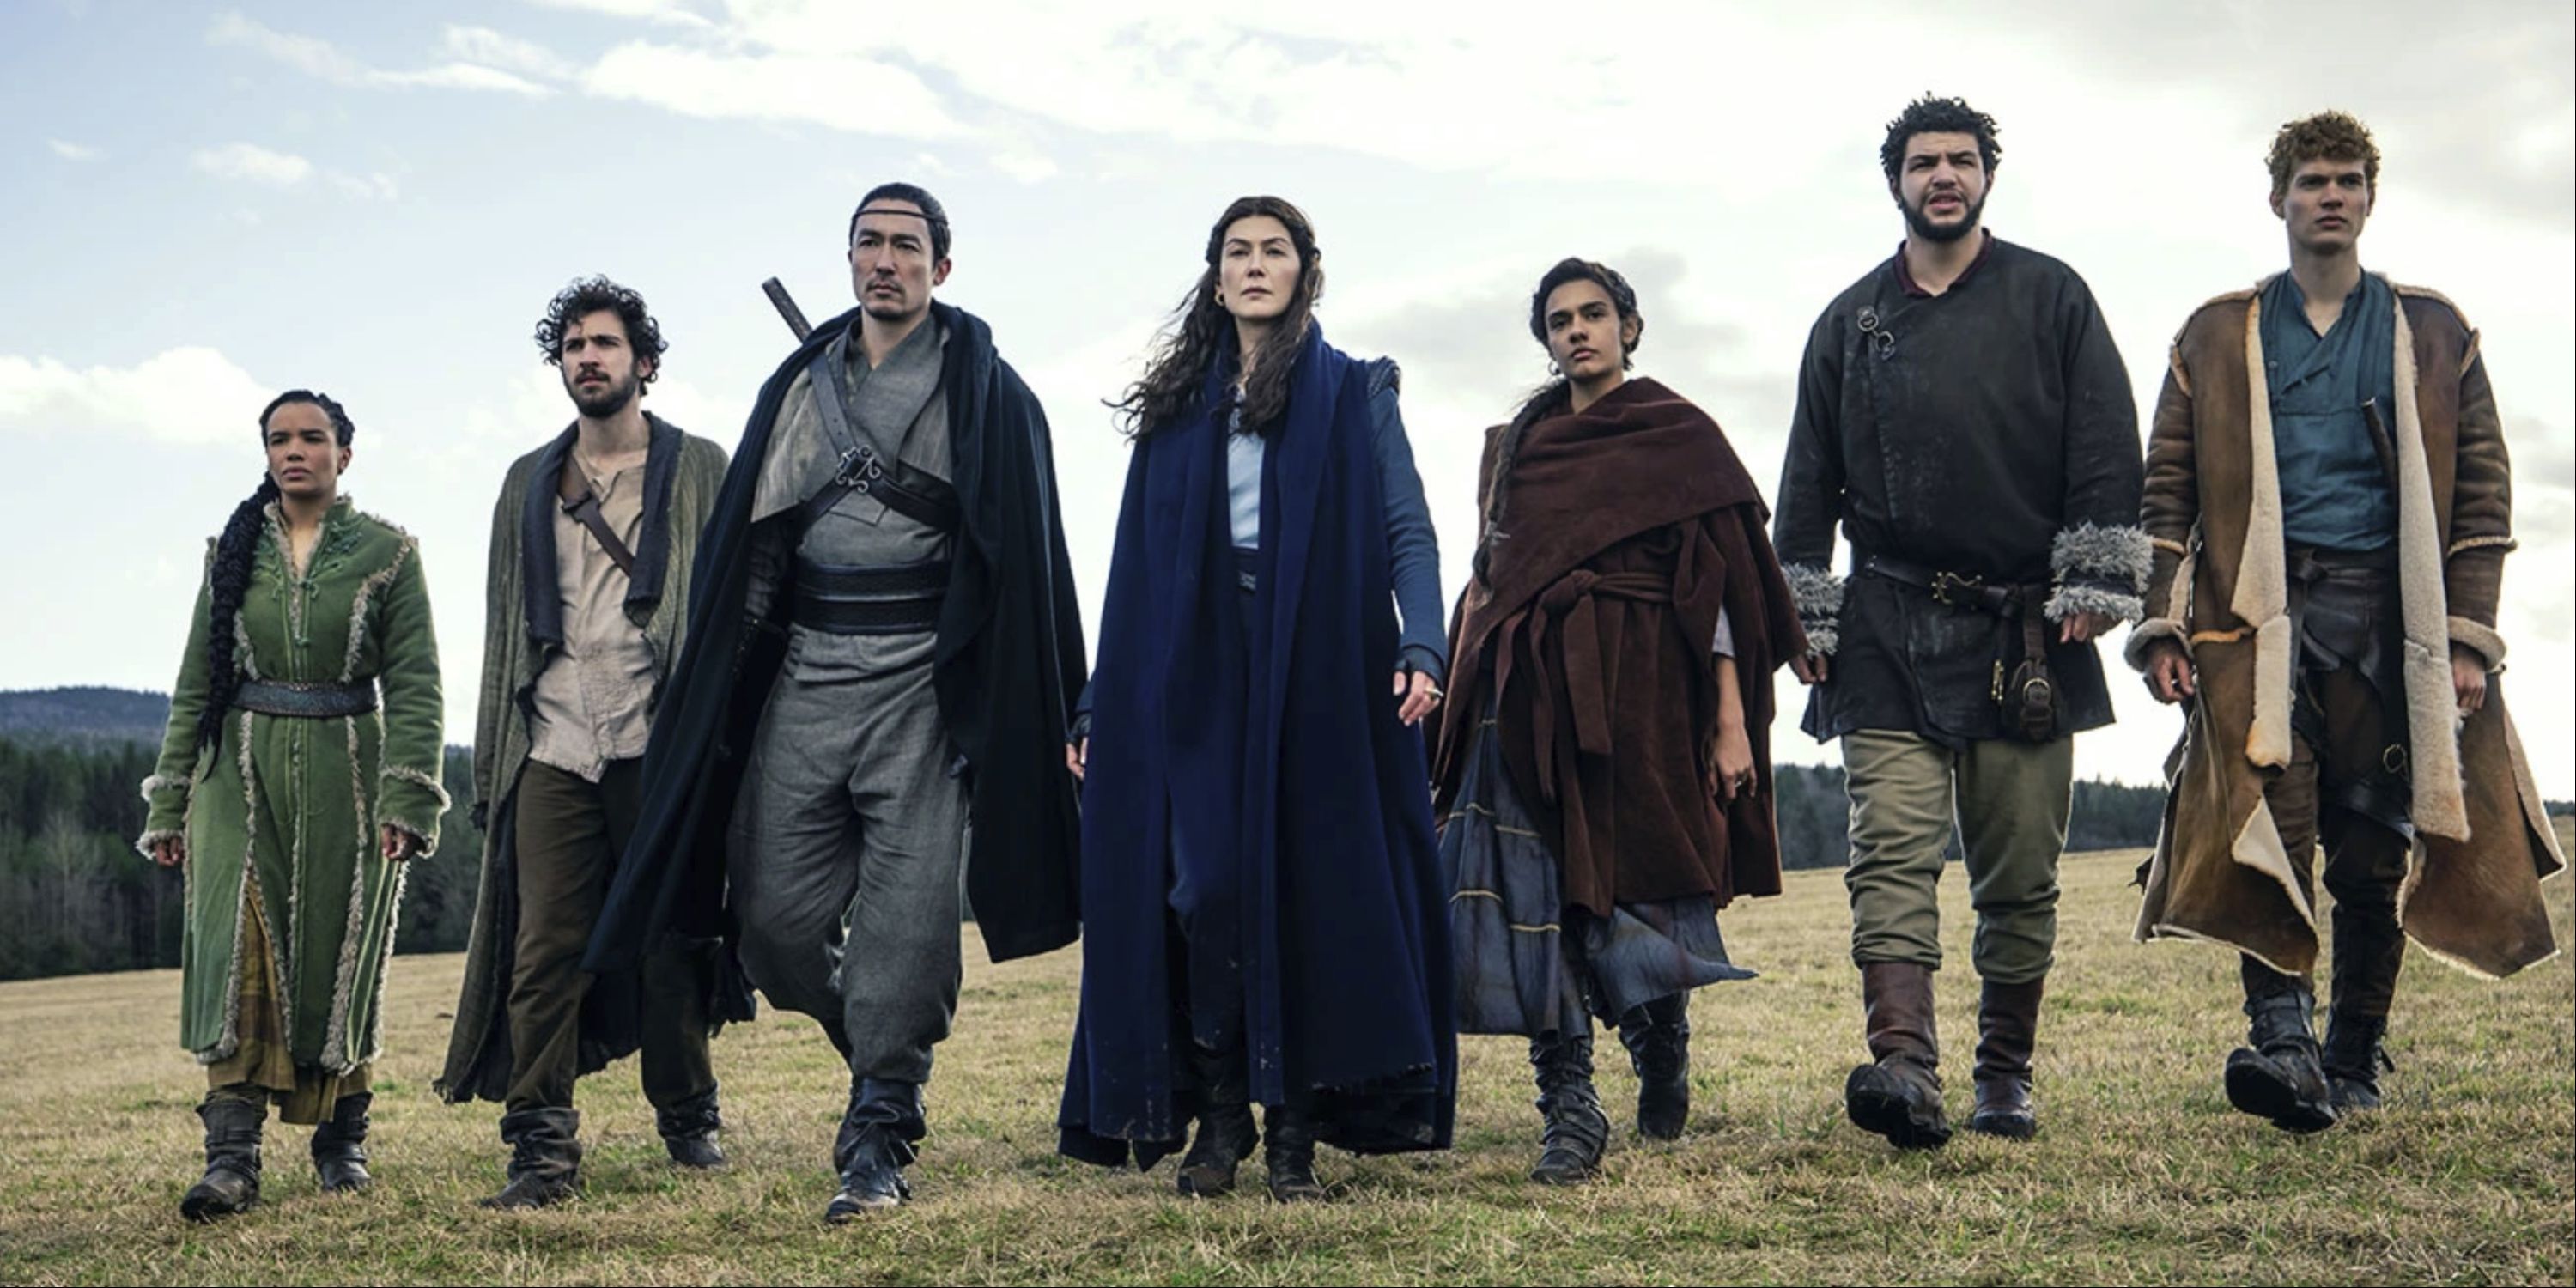 The cast of The Wheel of Time walking in a row in an open field.